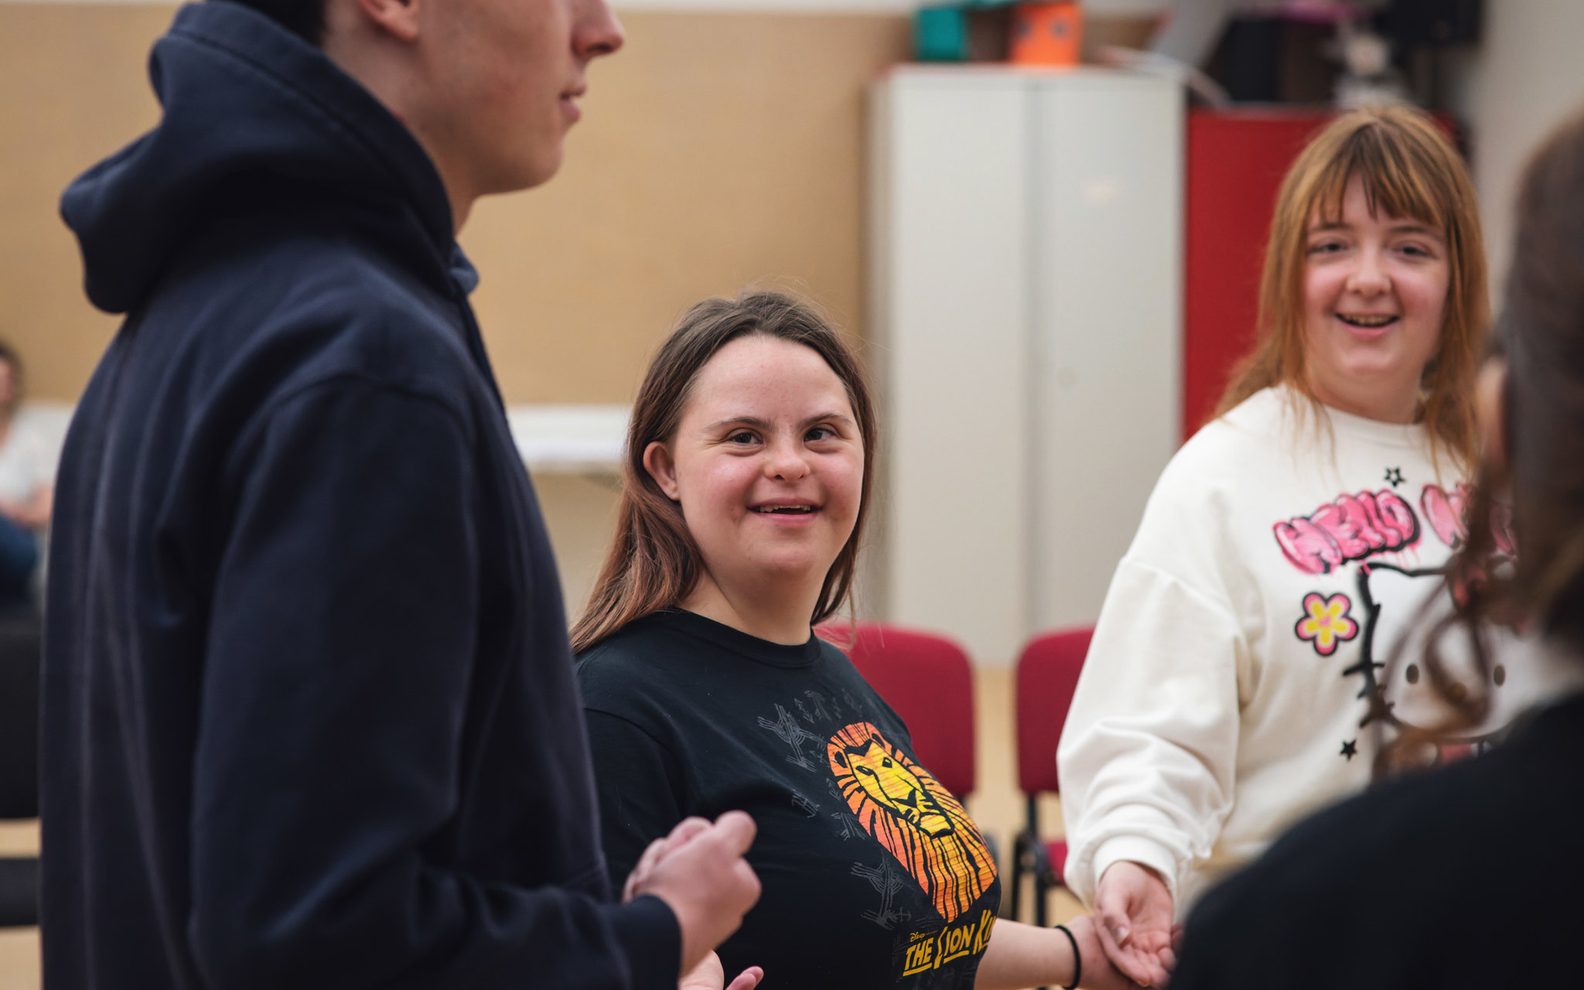 Three learning disabled young people taking part in a drama game. They are holding their hands out and are smiling.